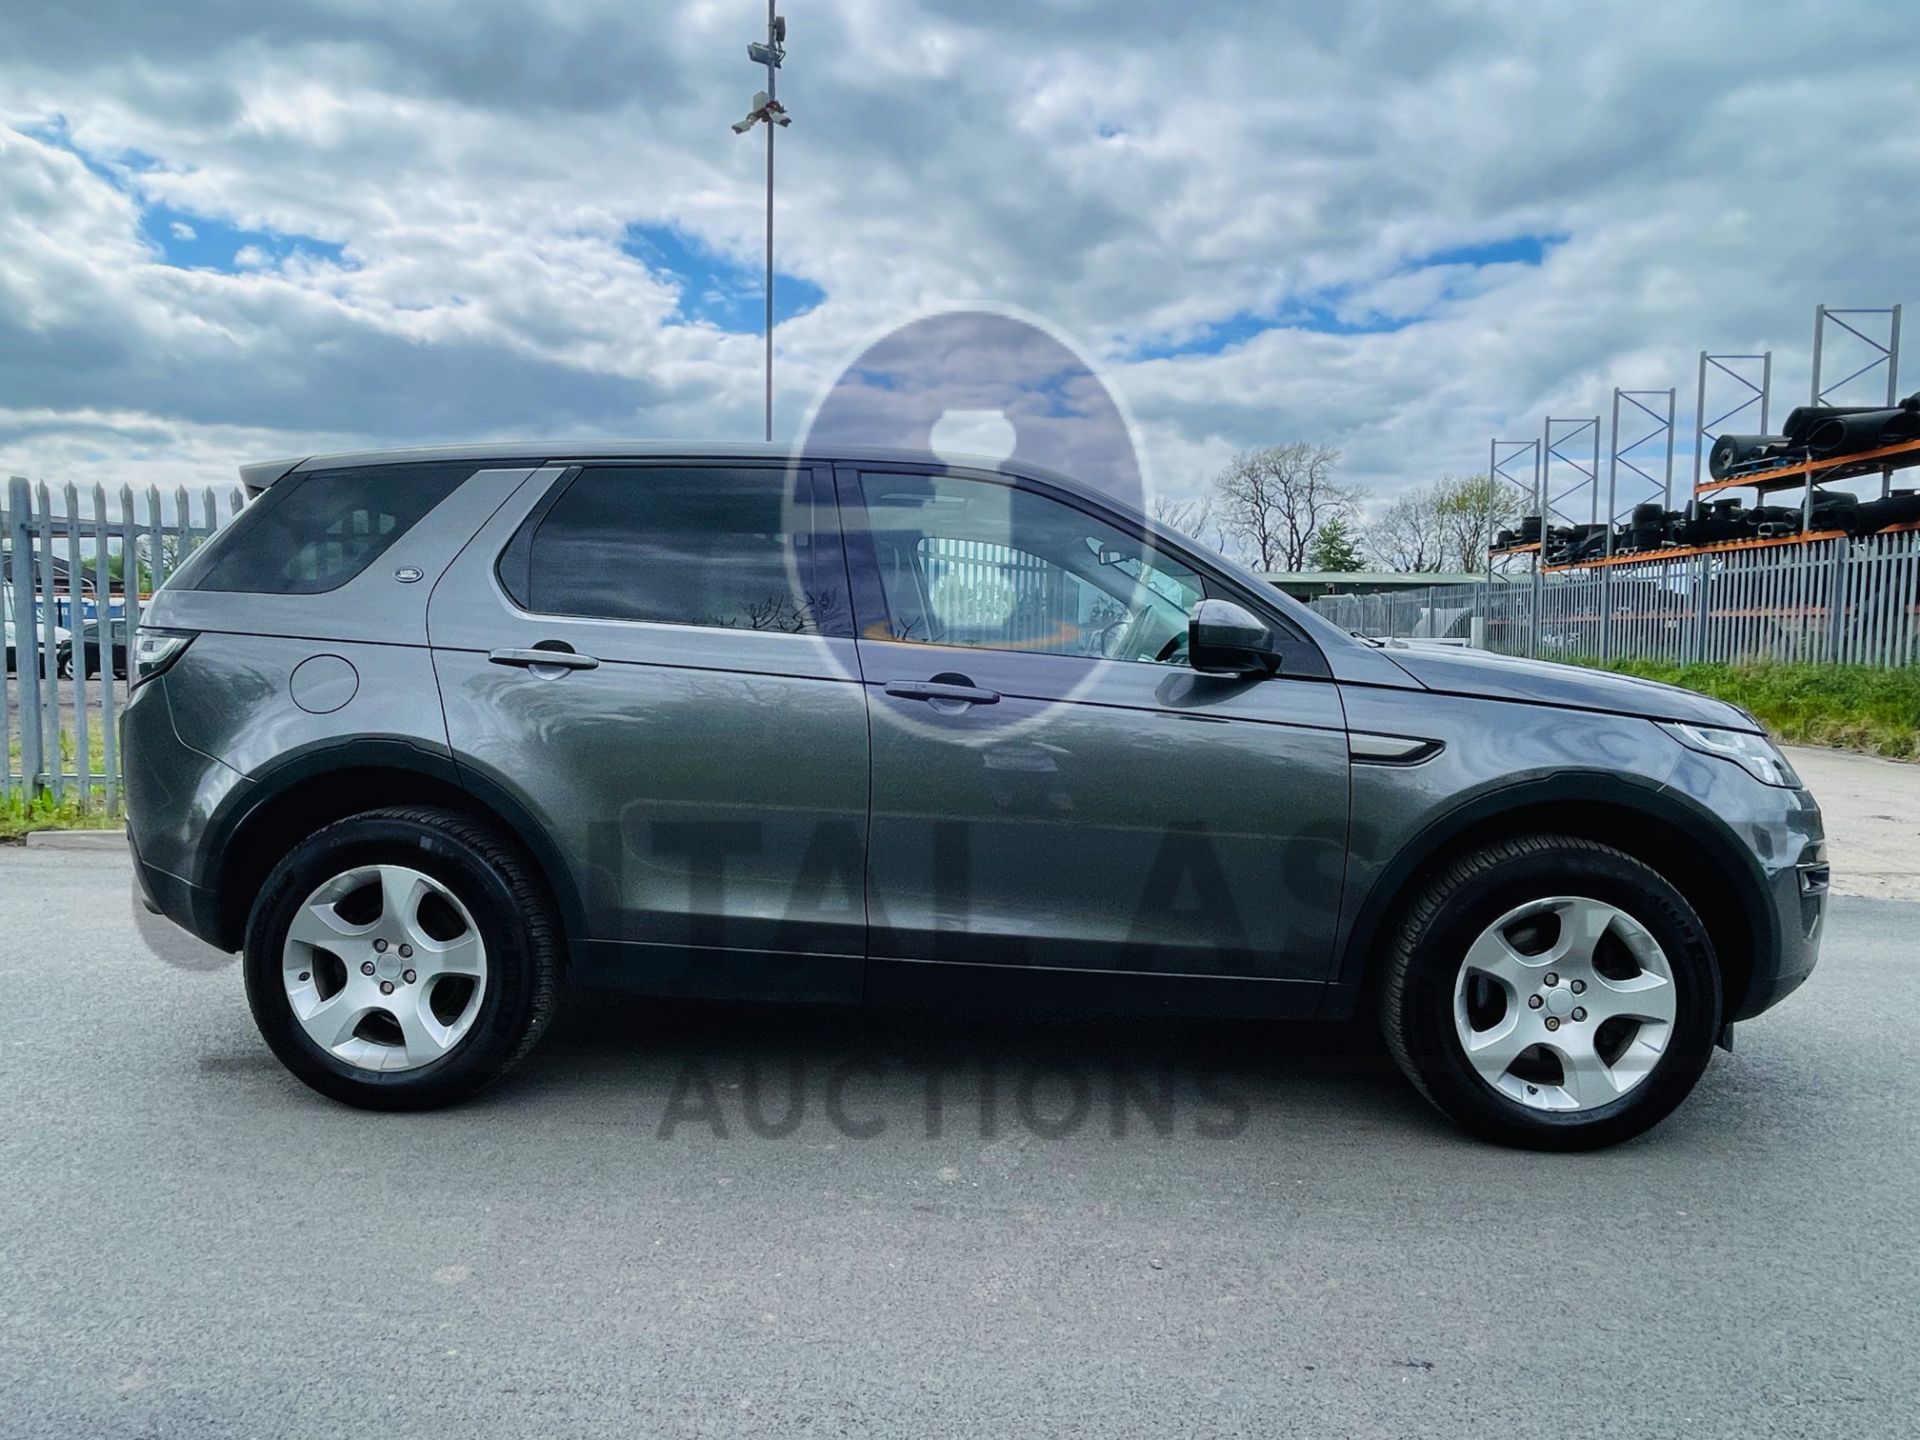 (ON SALE) LAND ROVER DISCOVERY SPORT *SE TECH* SUV (2017 - EURO 6) 2.0 TD4 - AUTO STOP/START(NO VAT) - Image 14 of 51